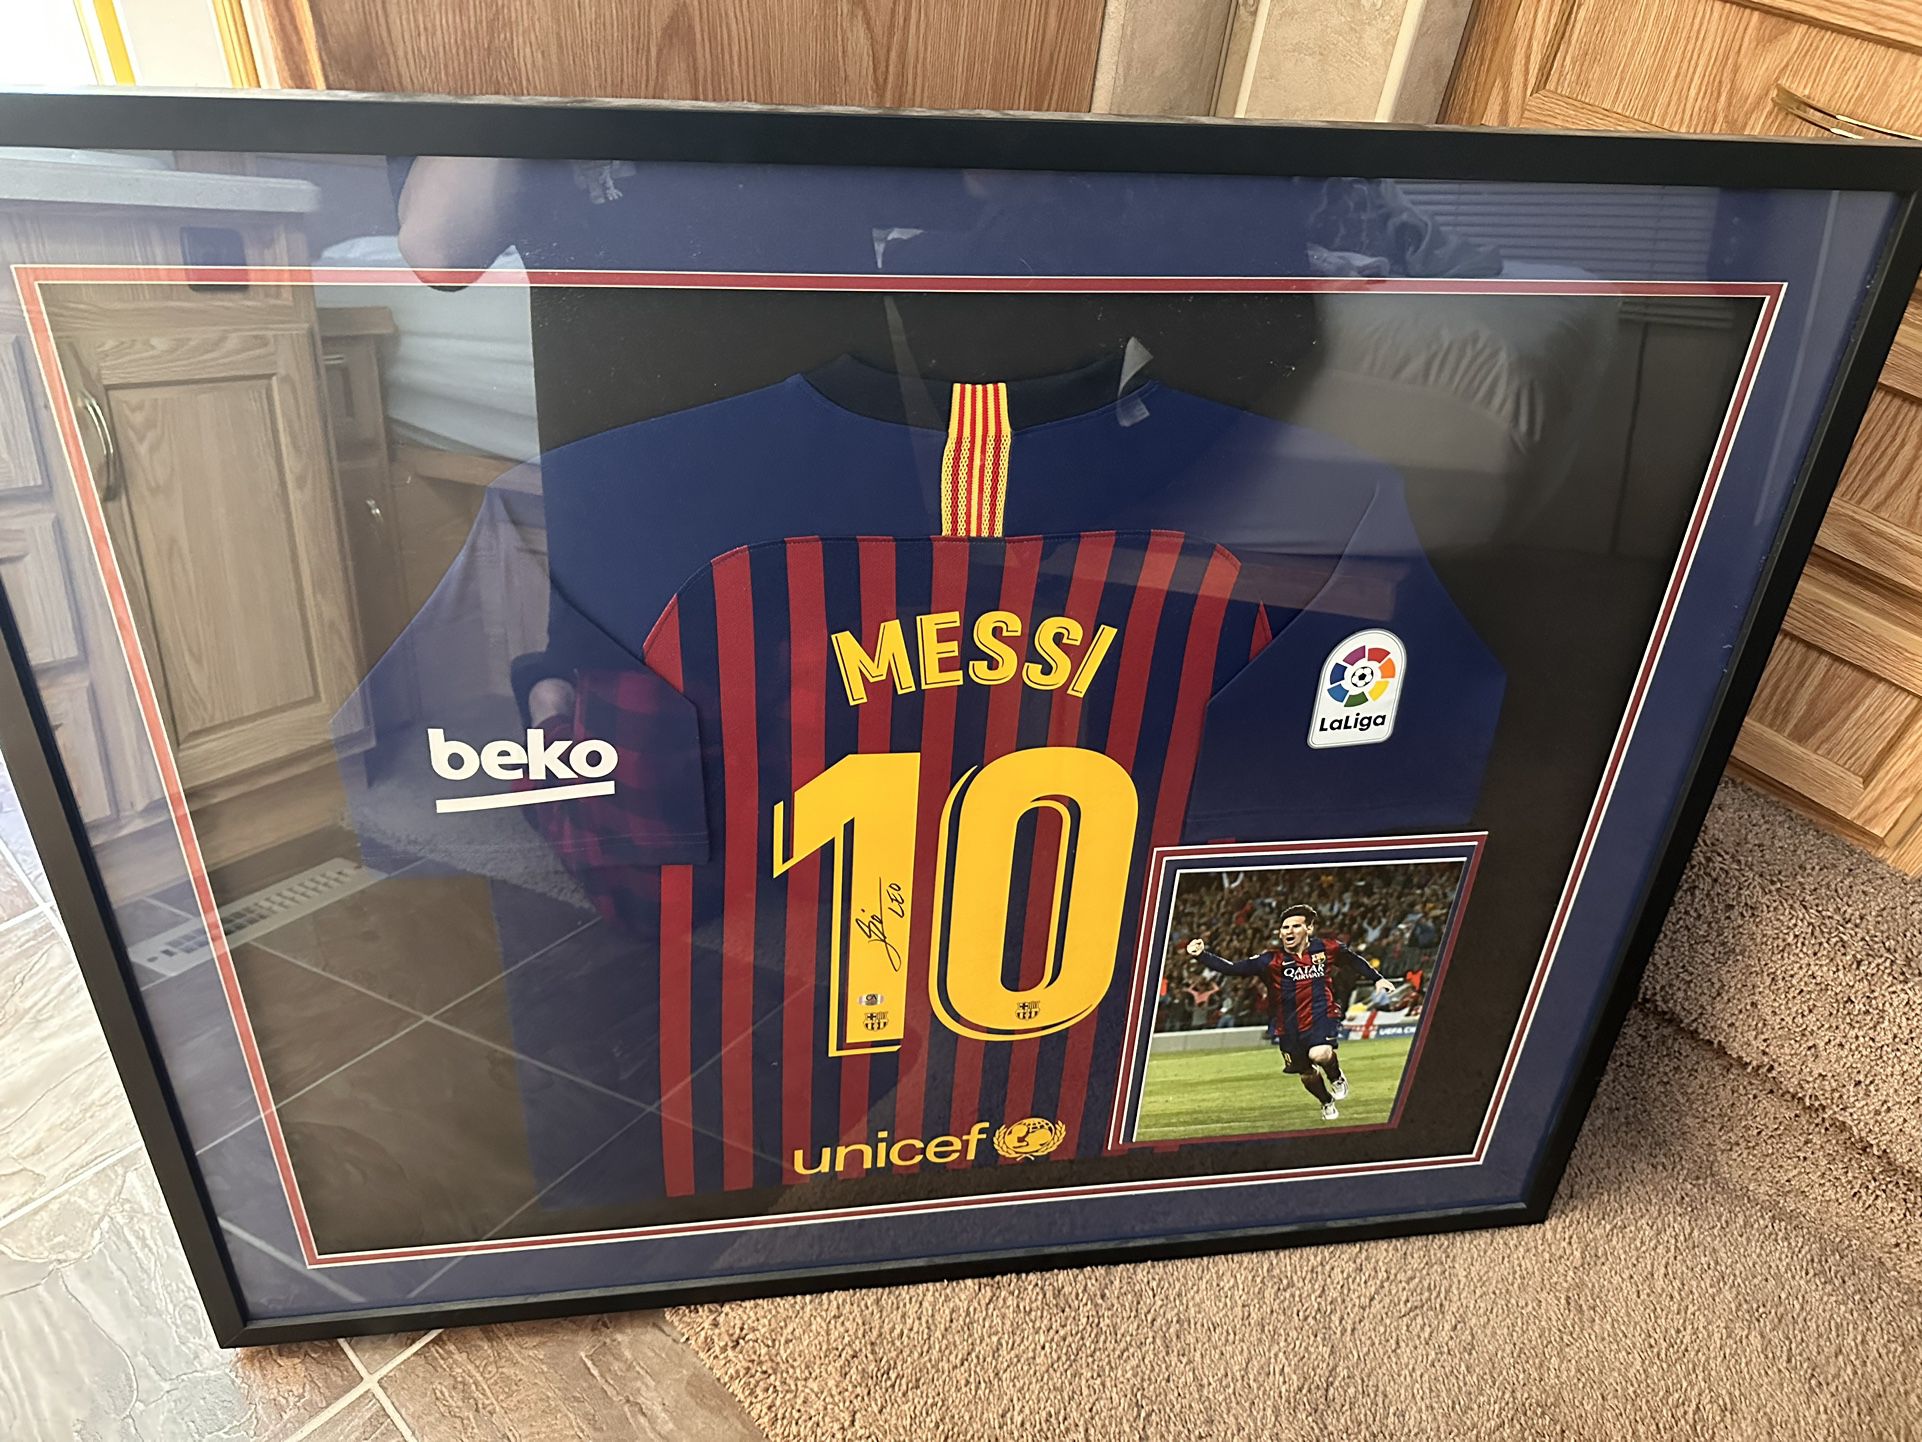 Signed Messi Jersey